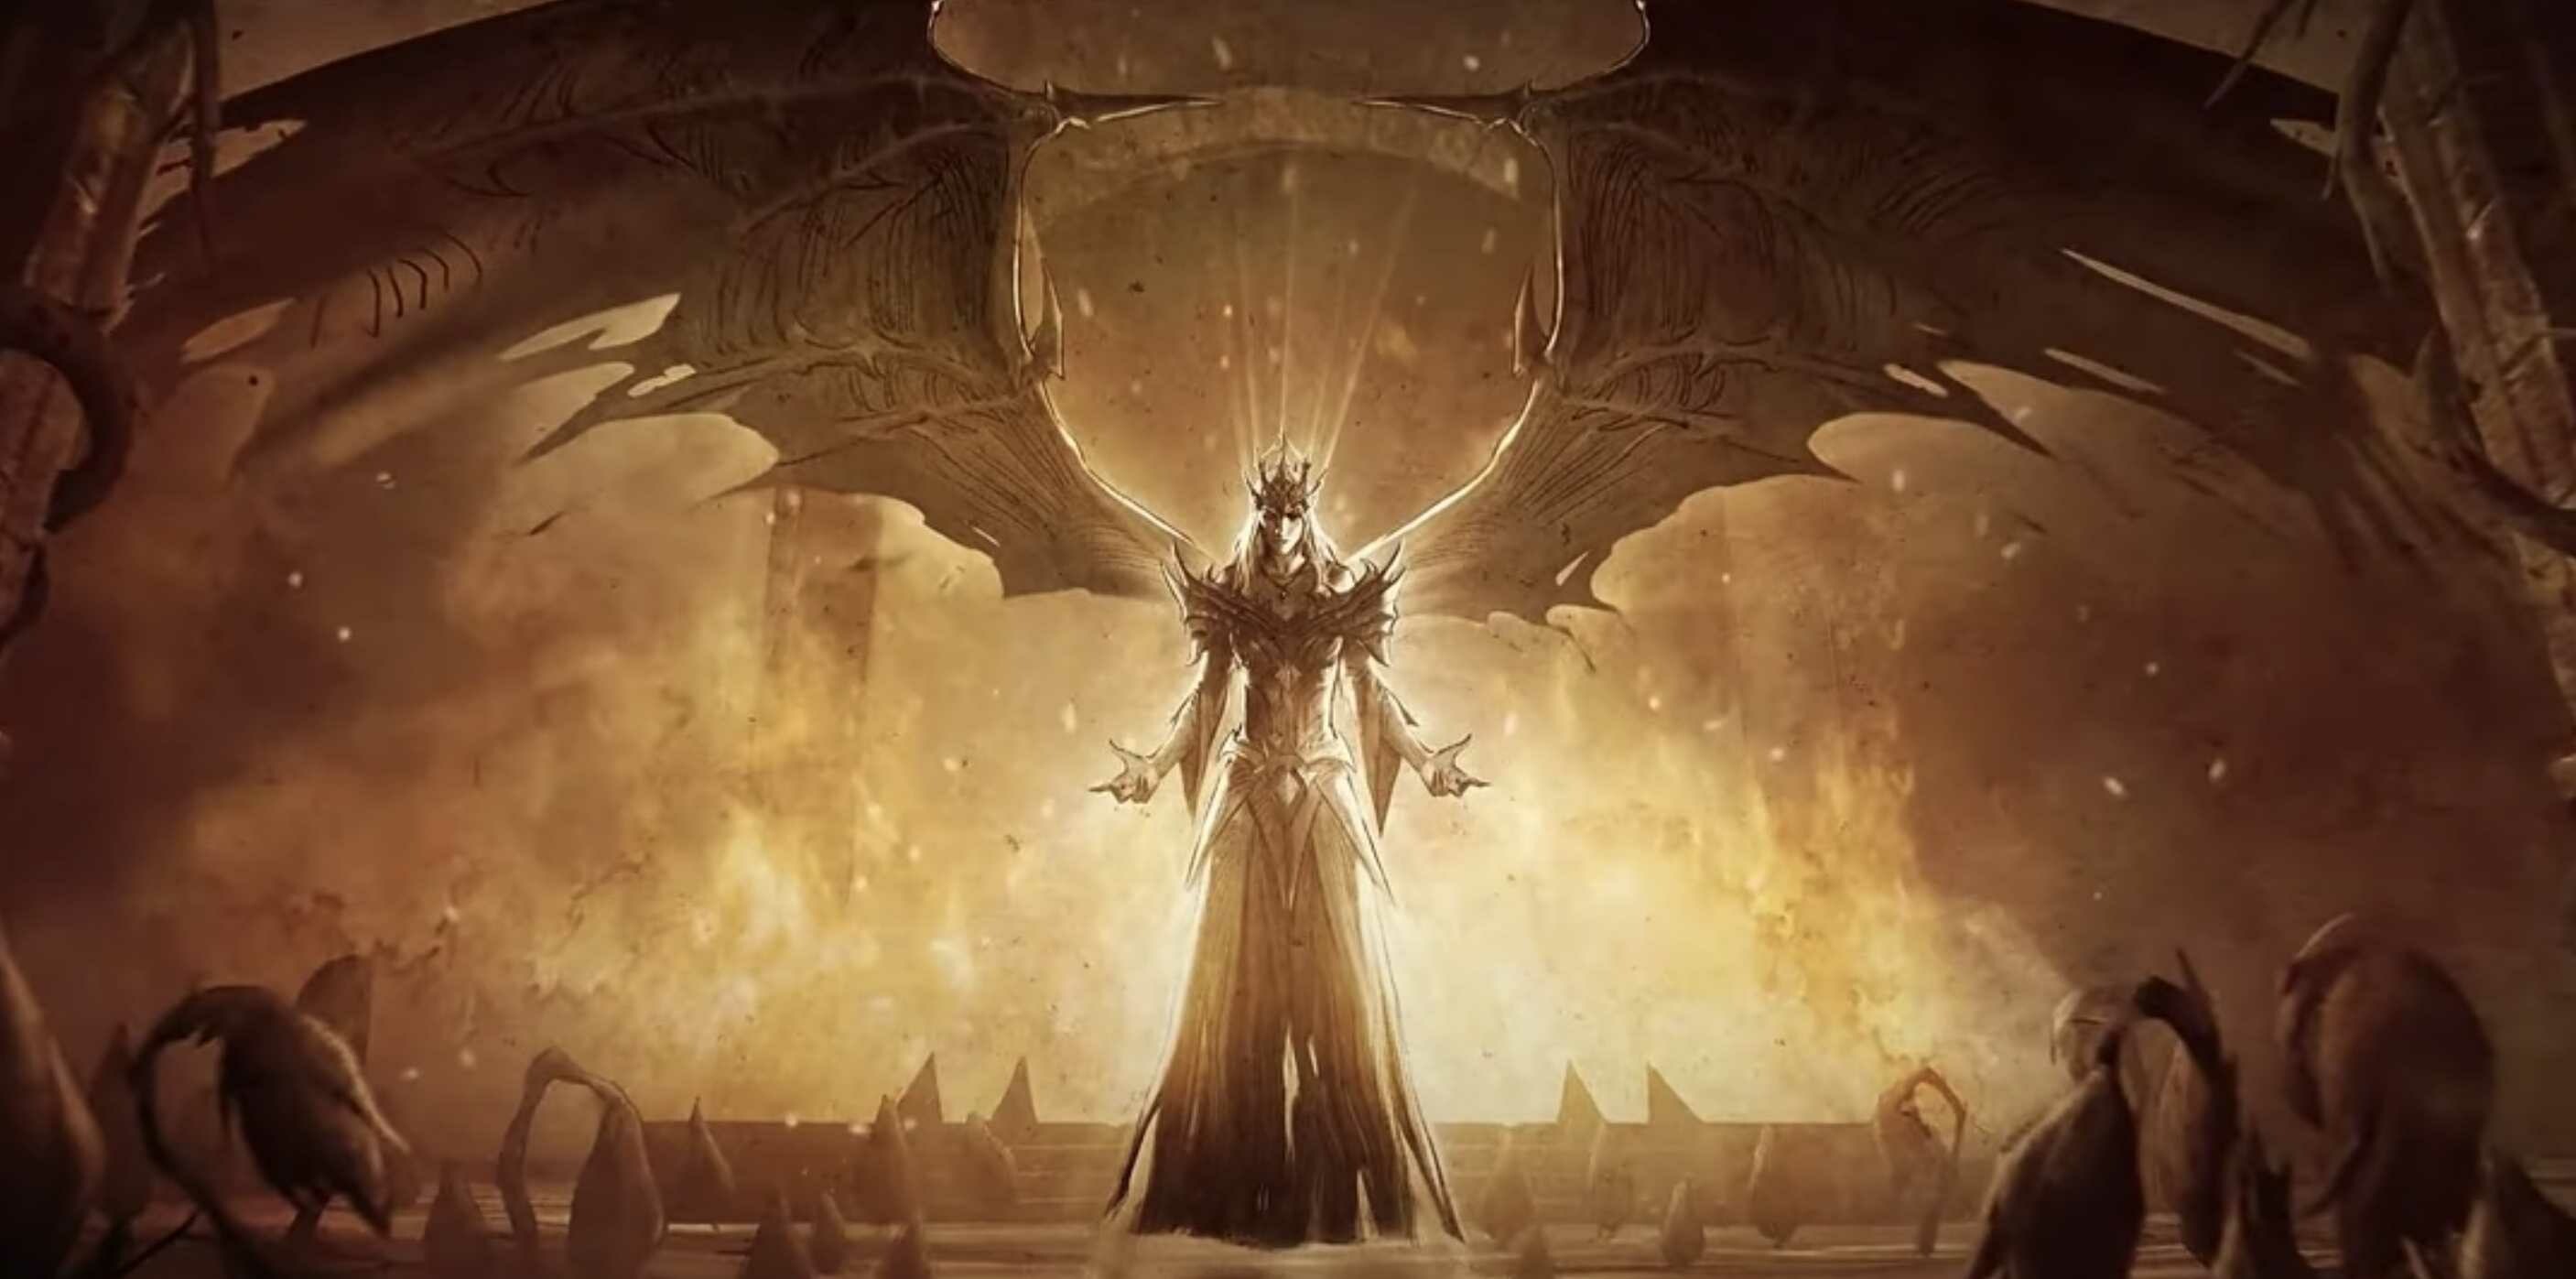 Diablo: The series primarily focuses on the ongoing conflict between the humans living in Sanctuary and the demon hordes who are led by the series' overarching antagonist. 2820x1400 Dual Screen Wallpaper.